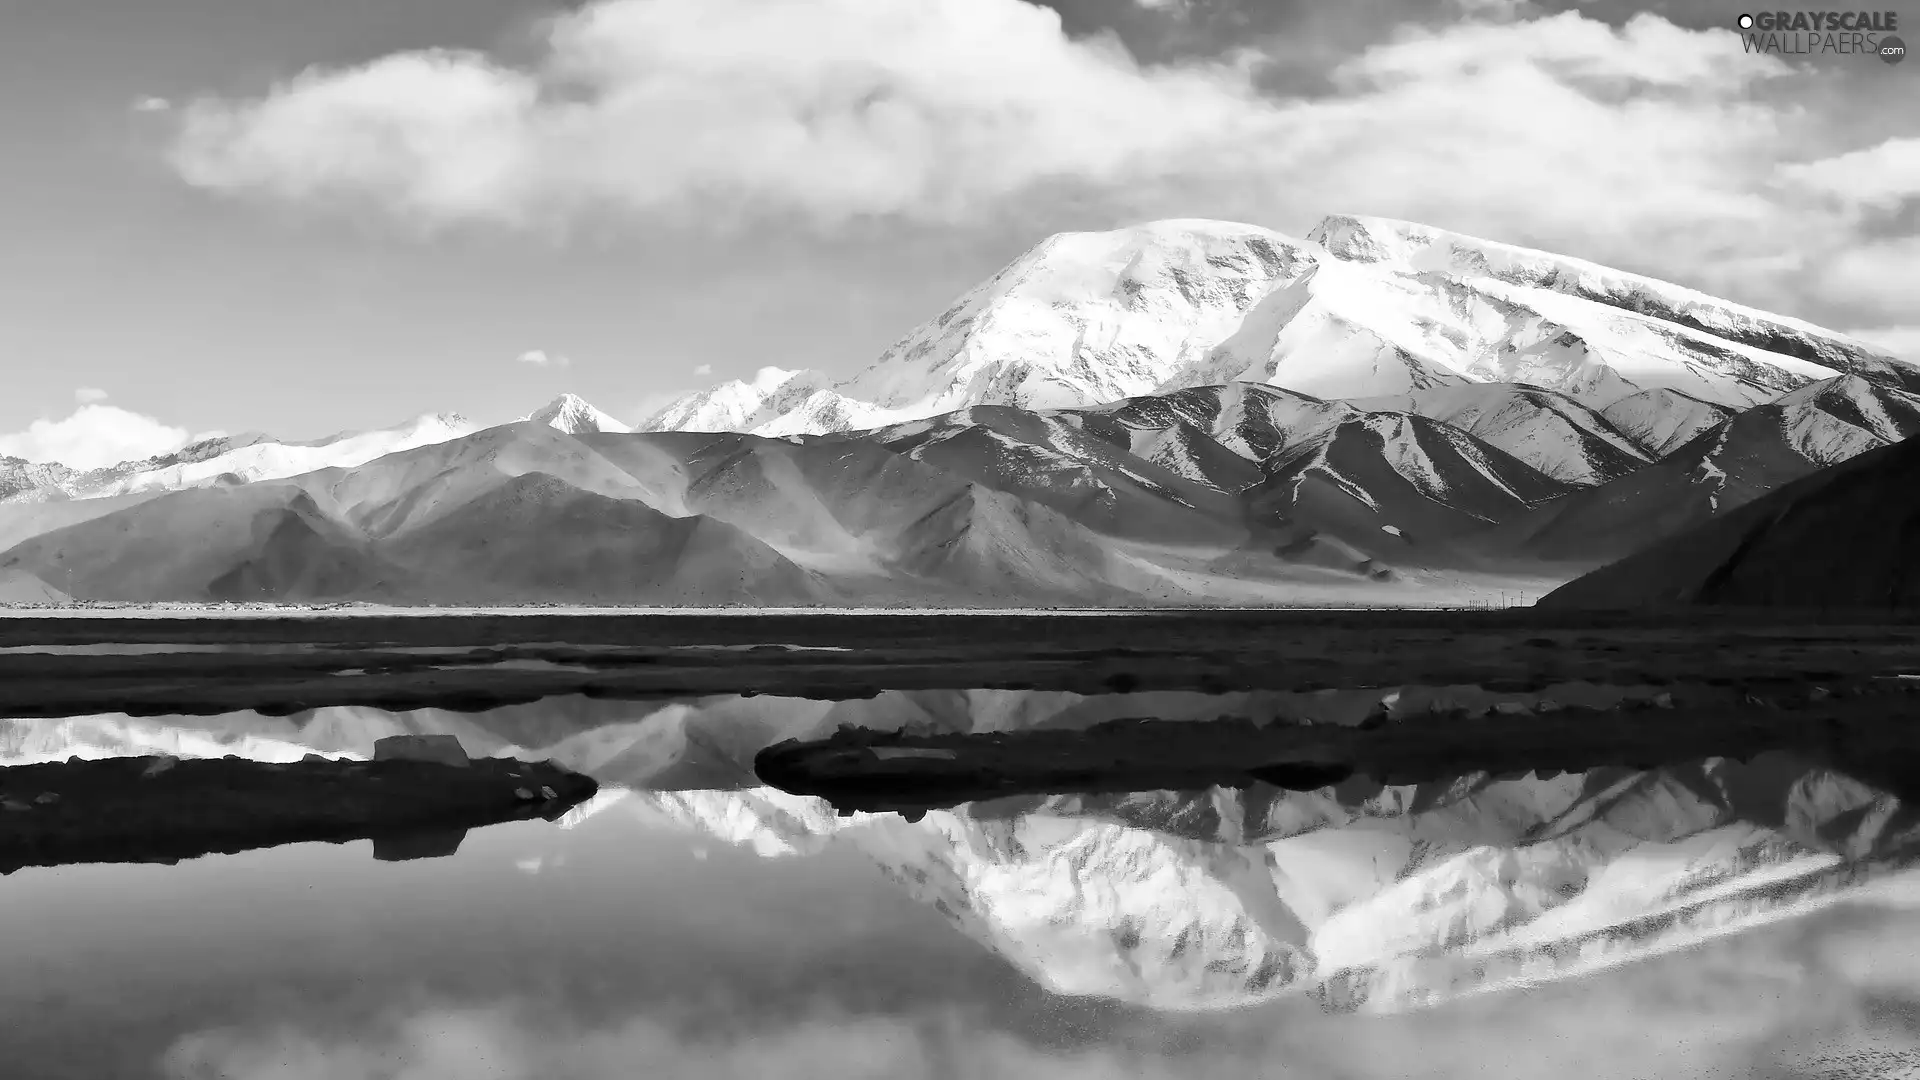 reflection, China, Mirror, water, Mountains